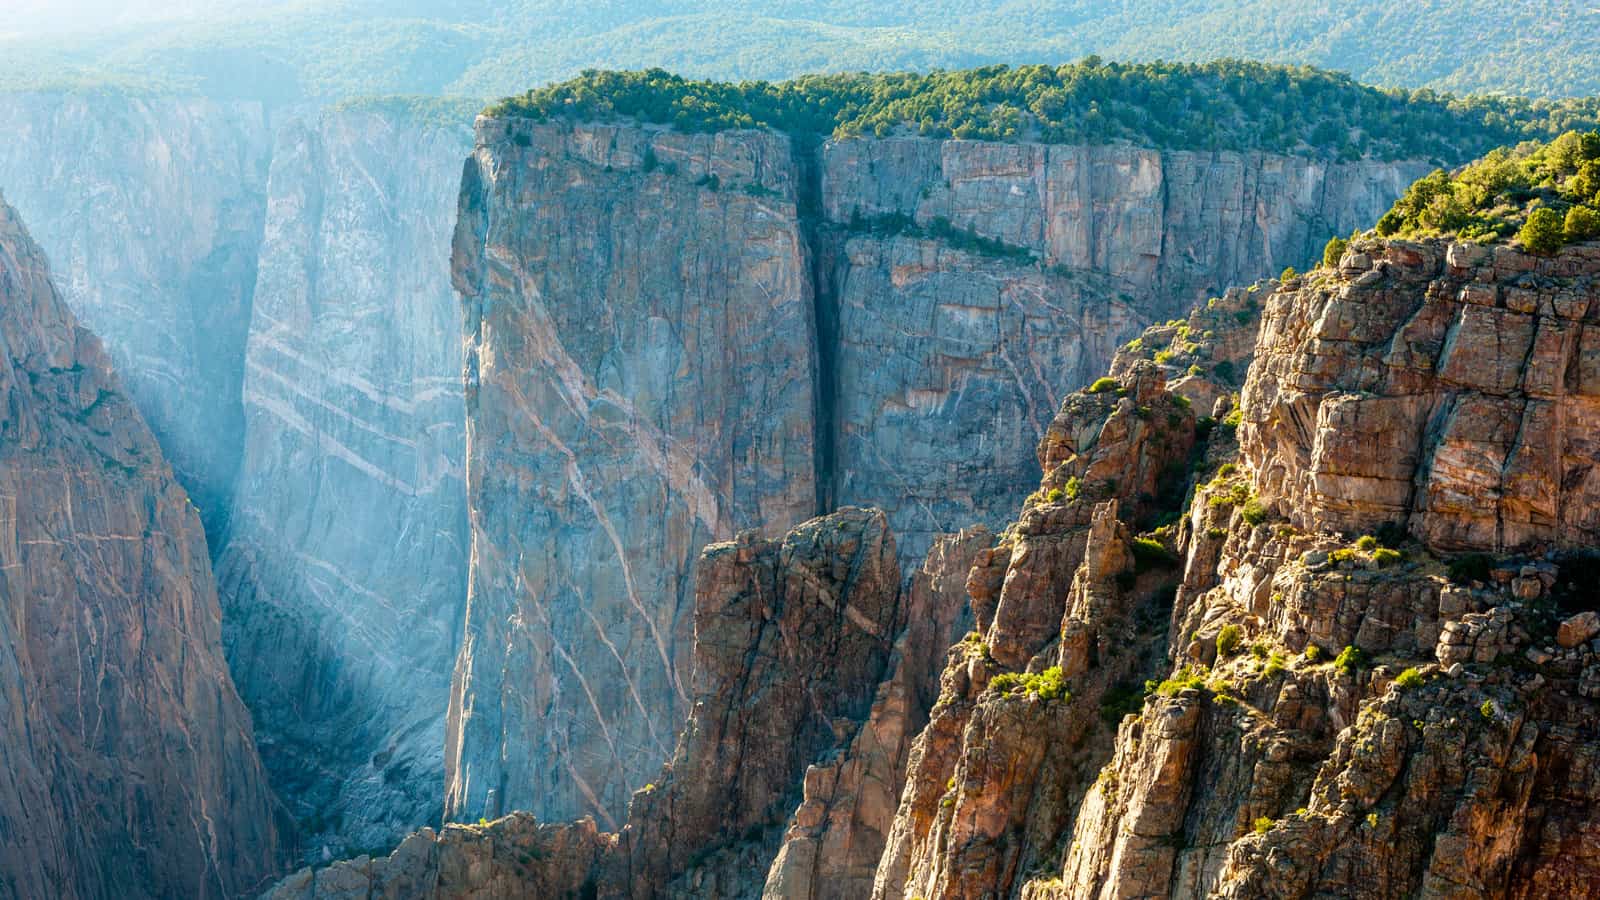 Black Canyon of the Gunnison National Park, Co, USA